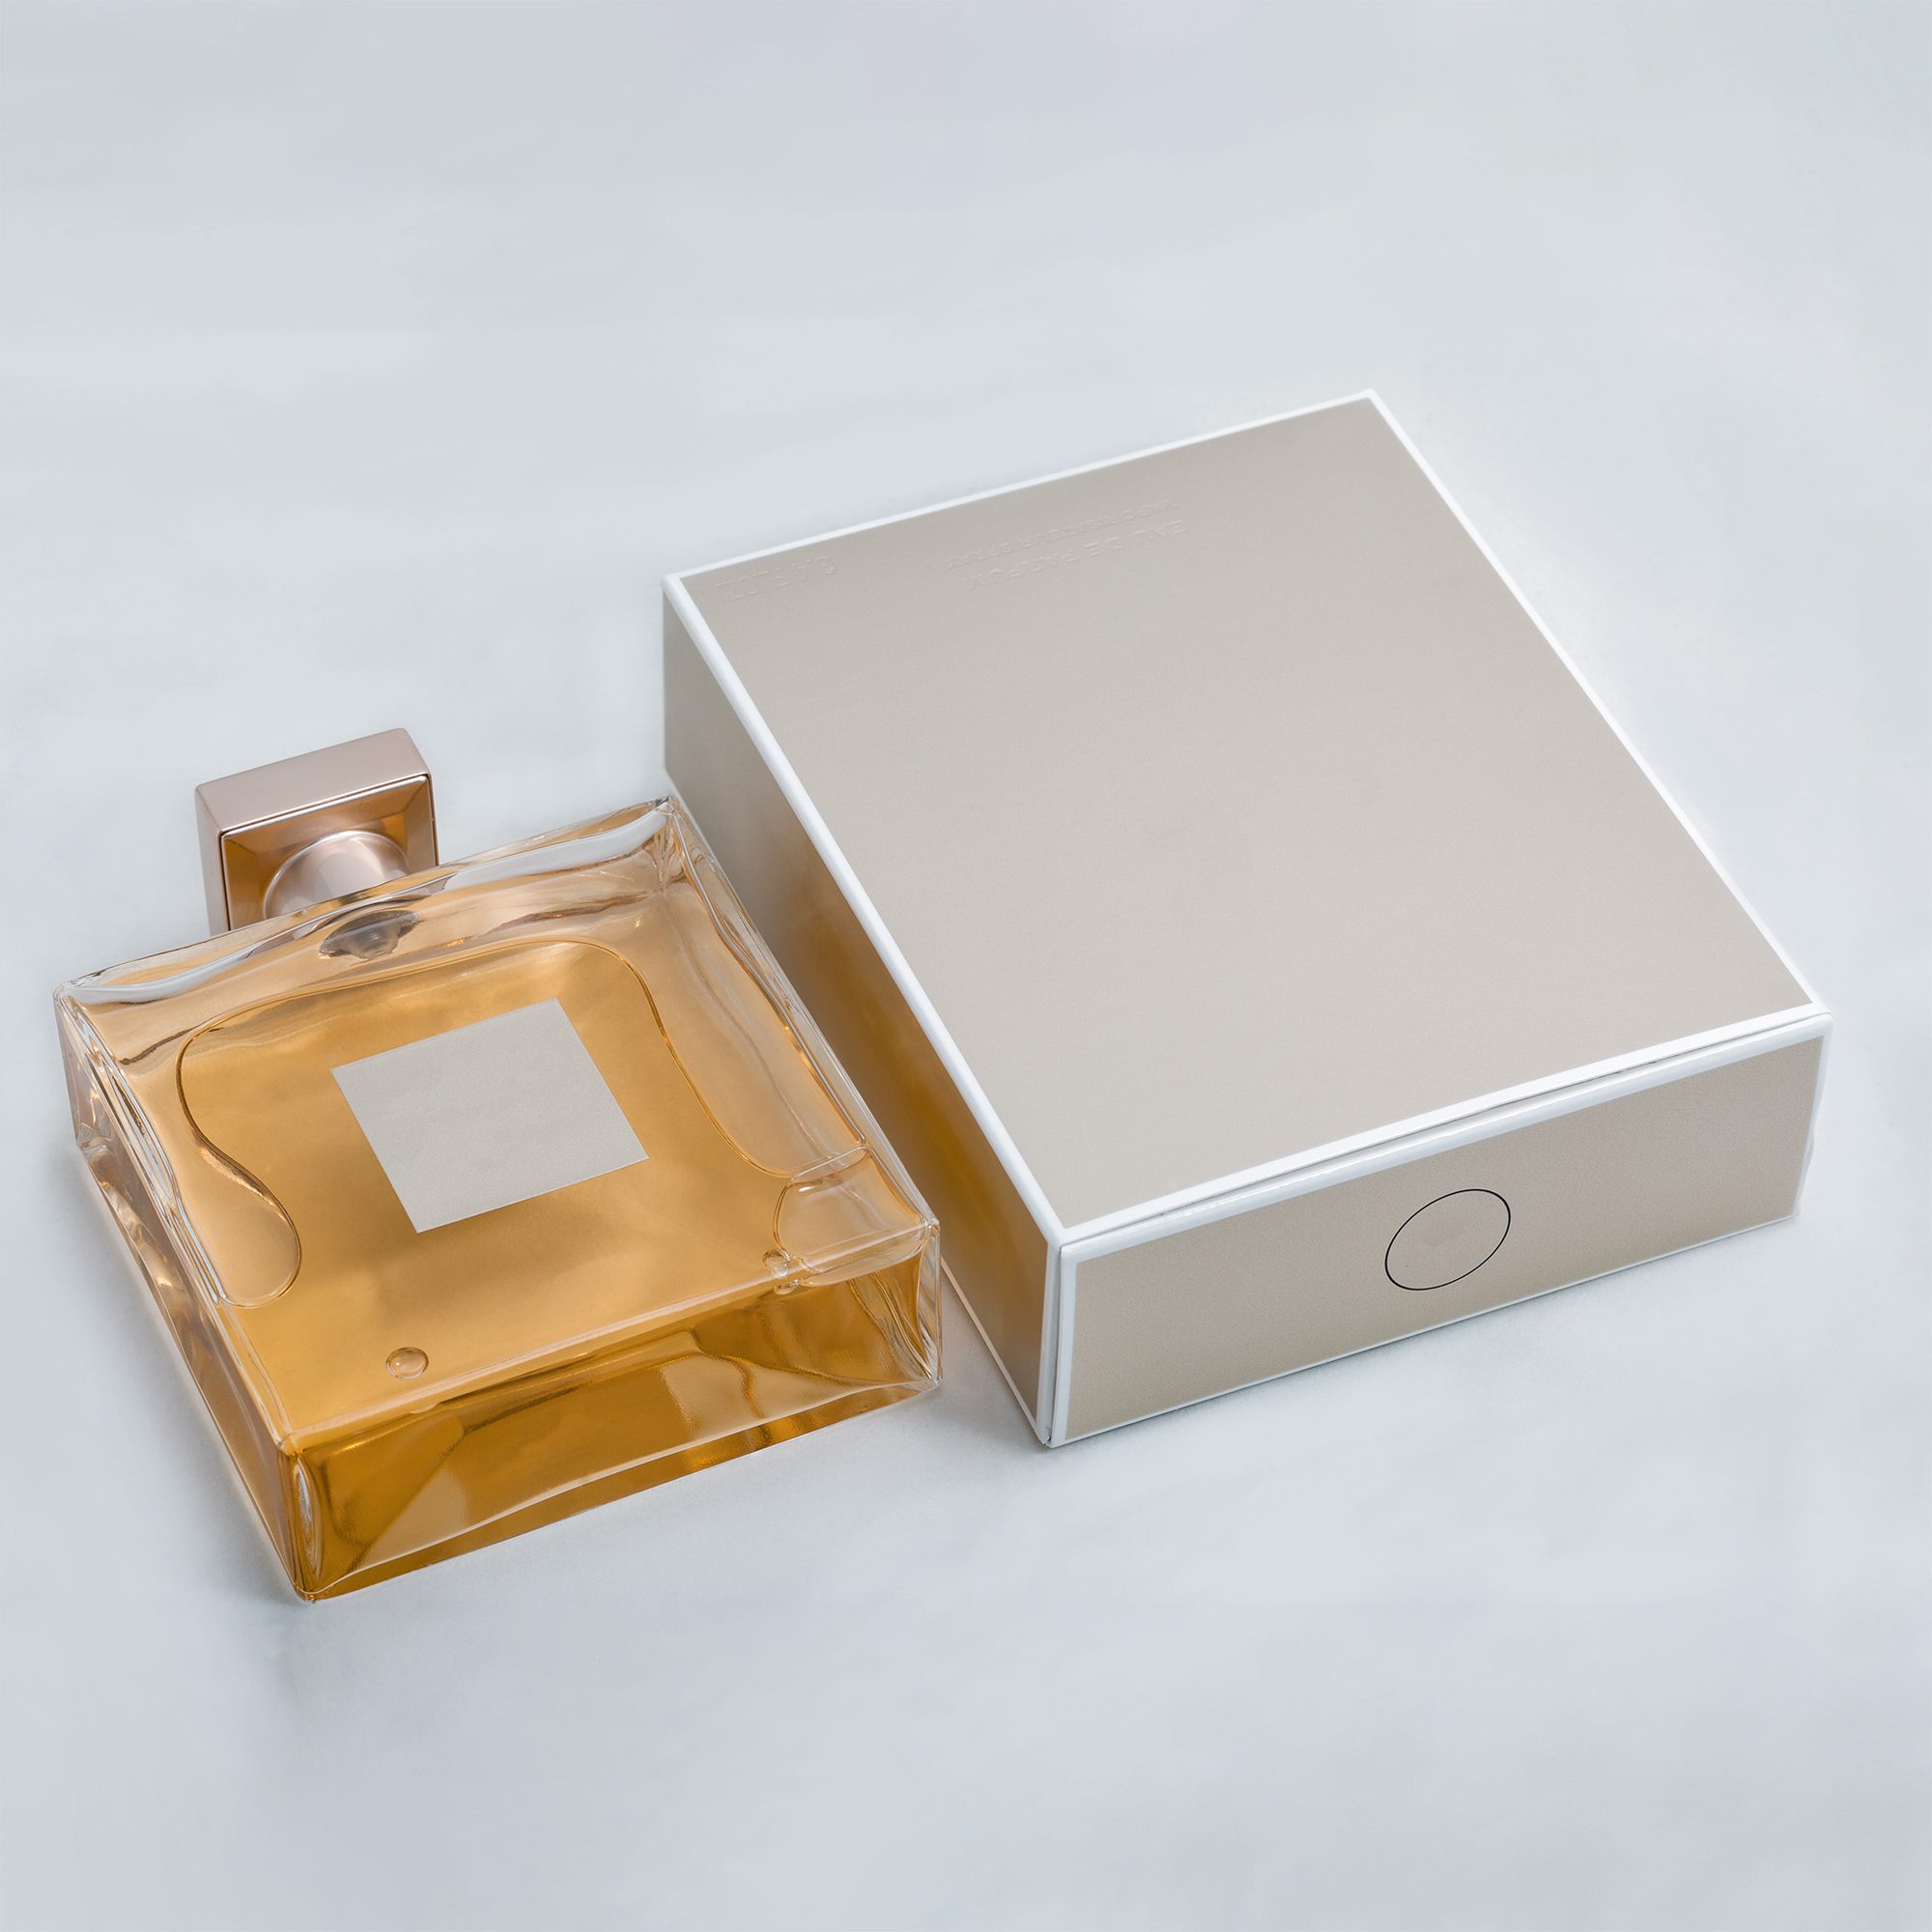 Perfume bottle and box